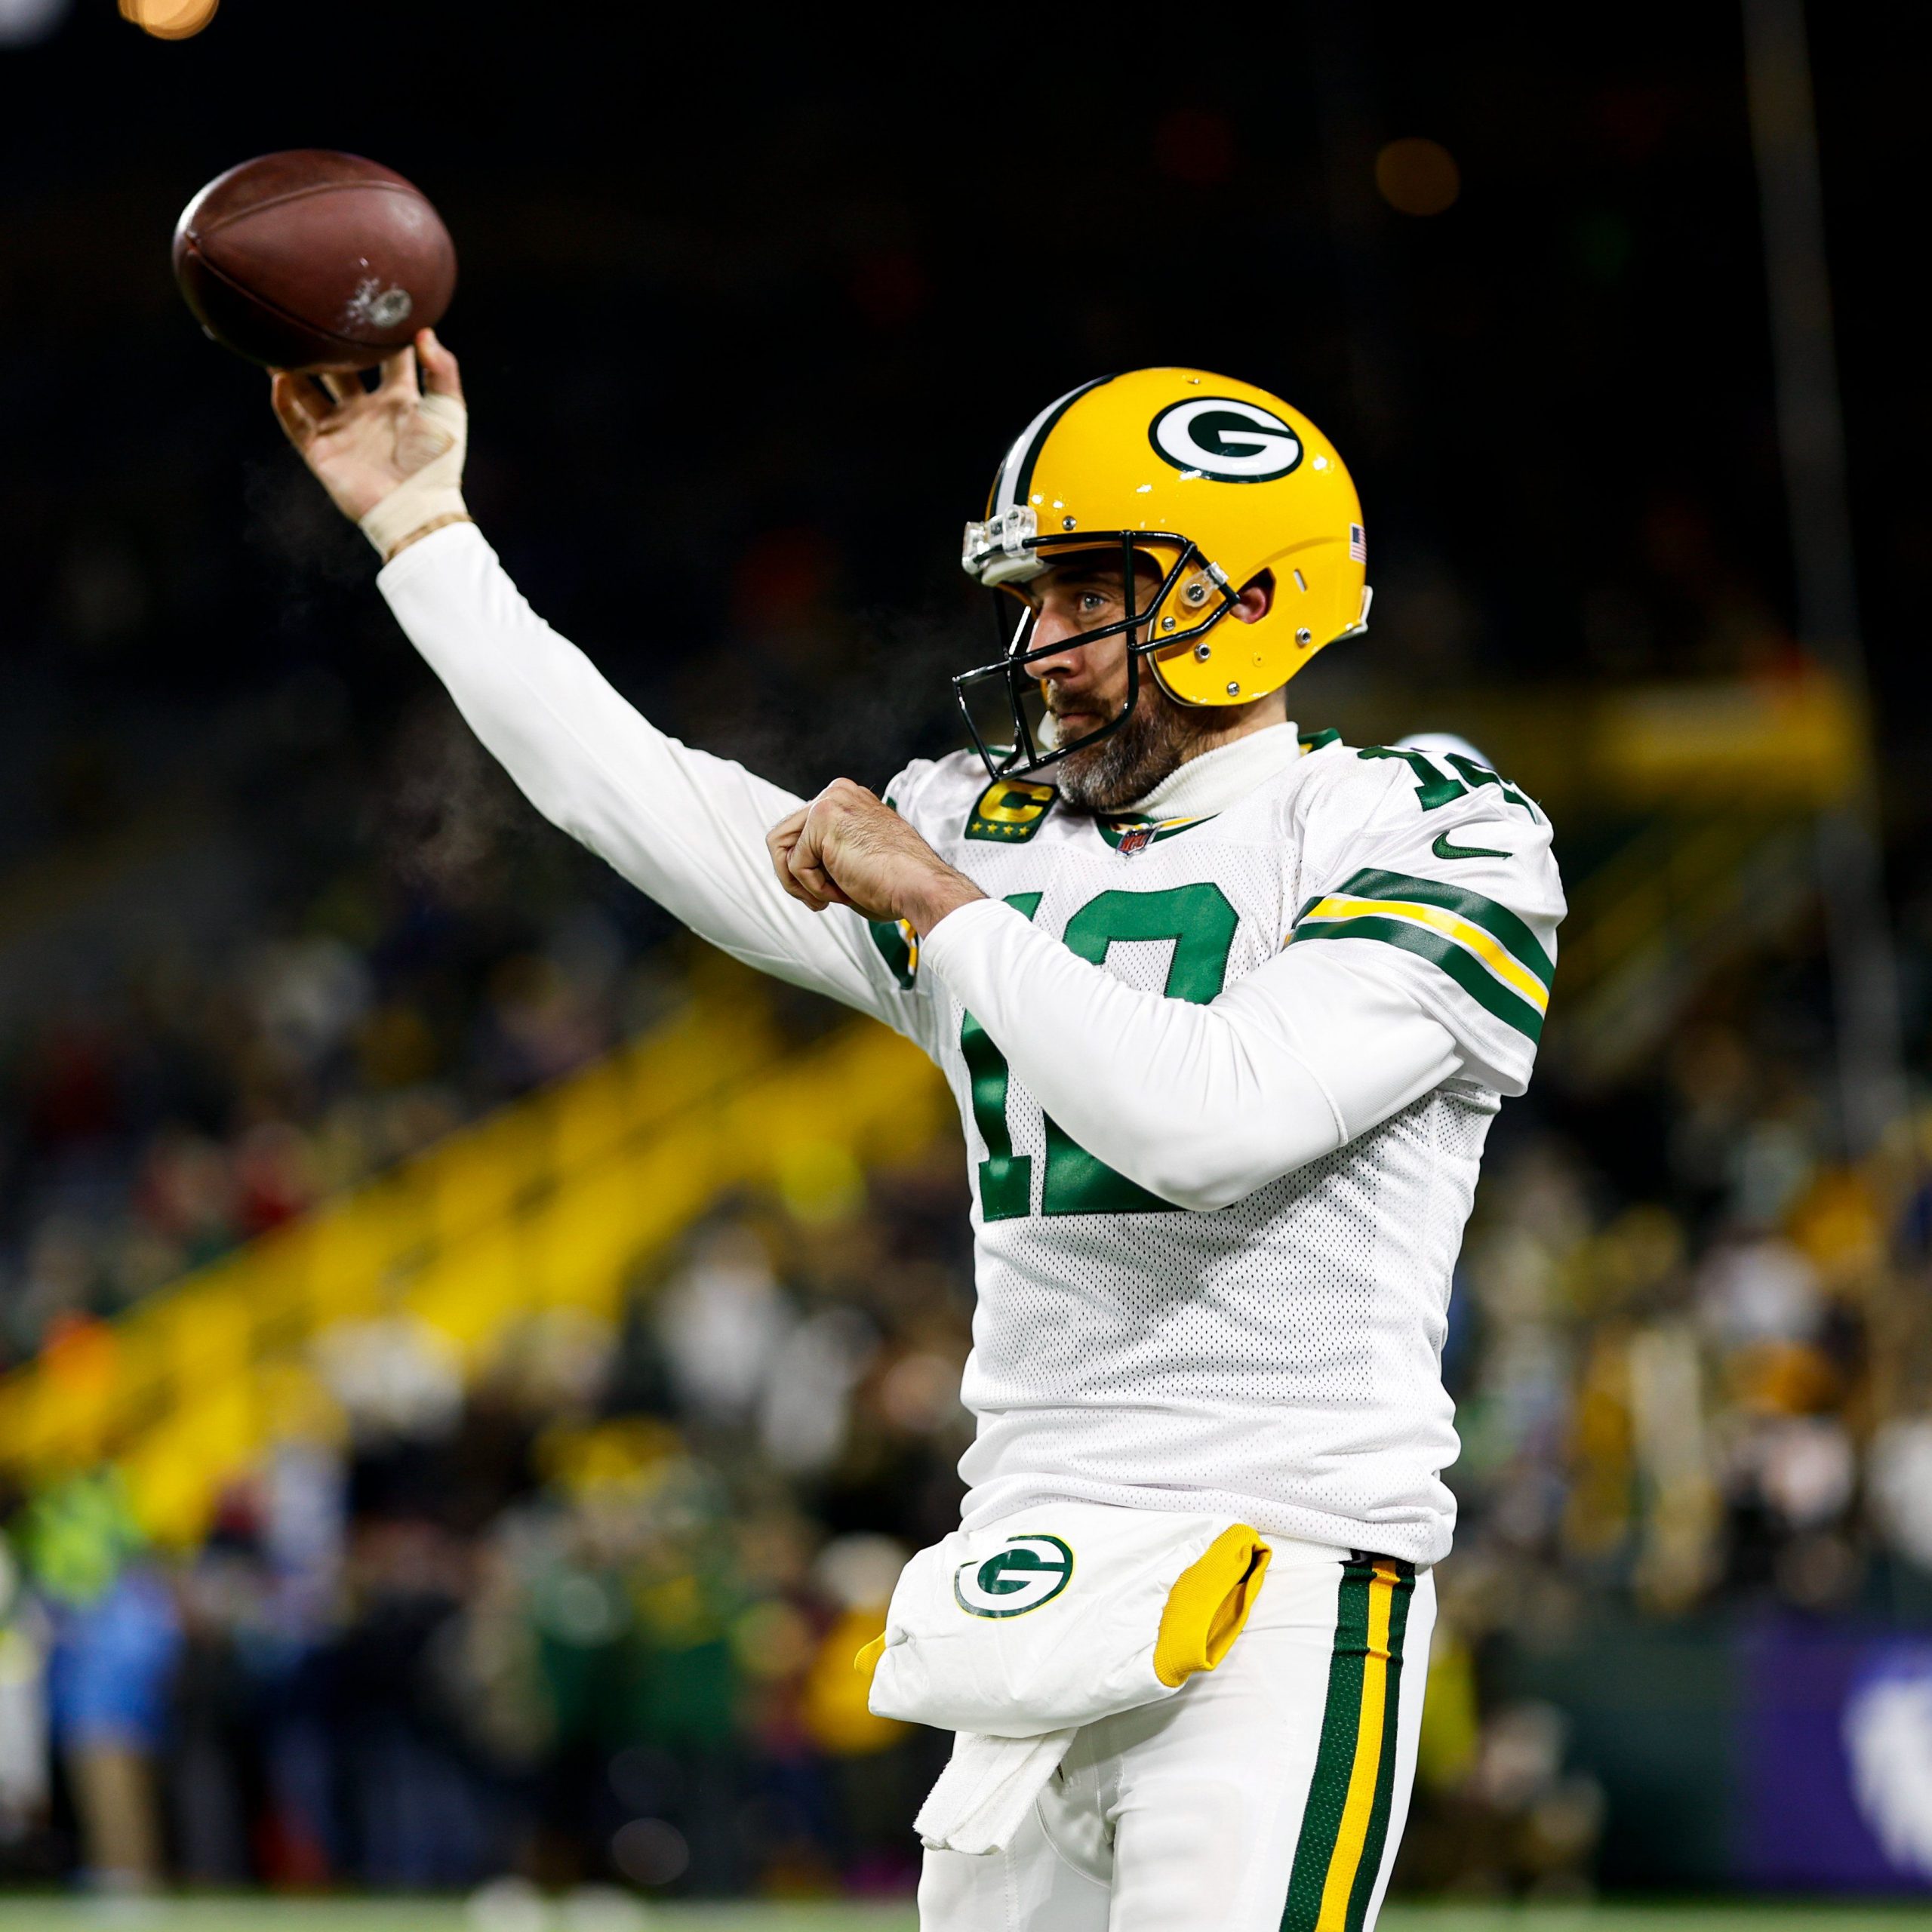 Fans slam Green Bay Packers’ Aaron Rodgers for overthrowing wide-open Christian Watson vs Miami Dolphins